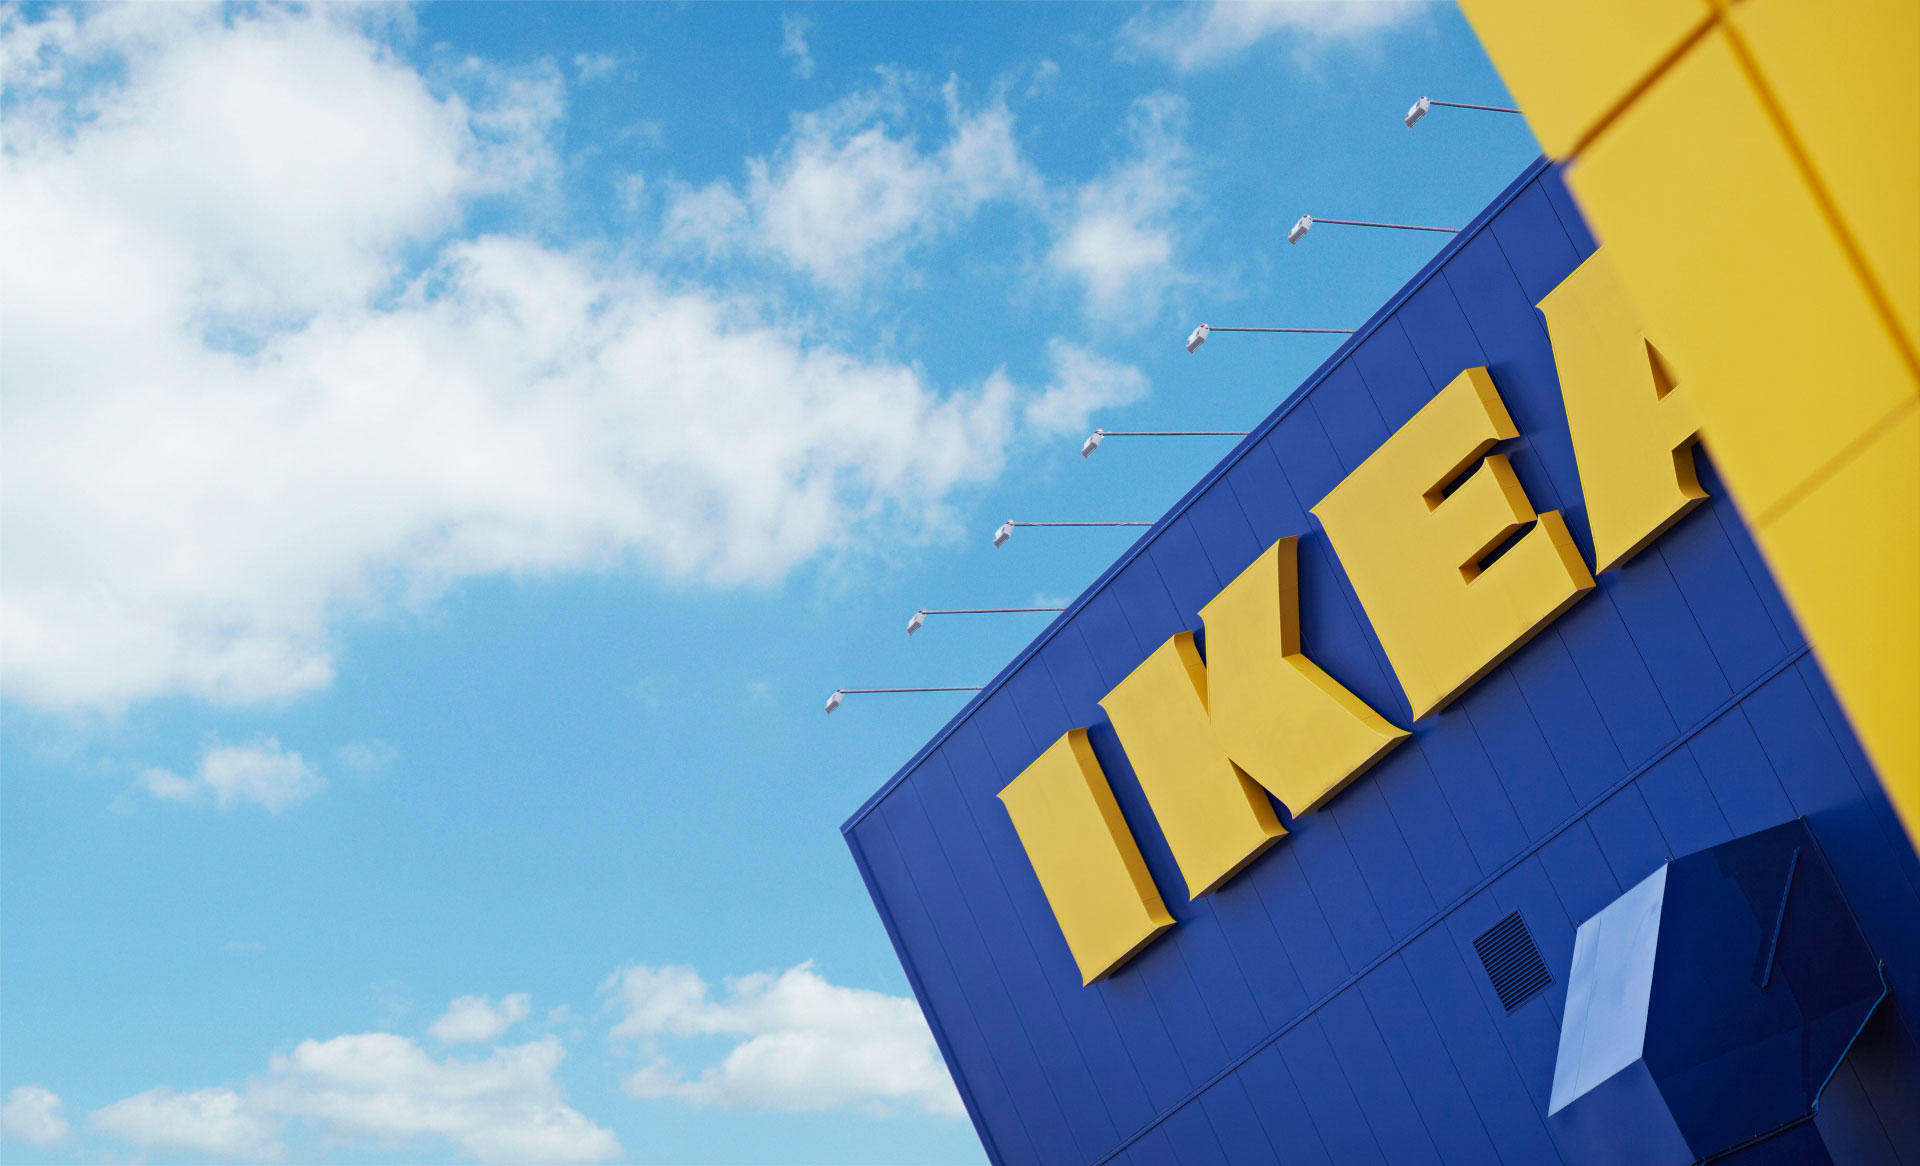 IKEA U.S. launches As-is online service - IKEA